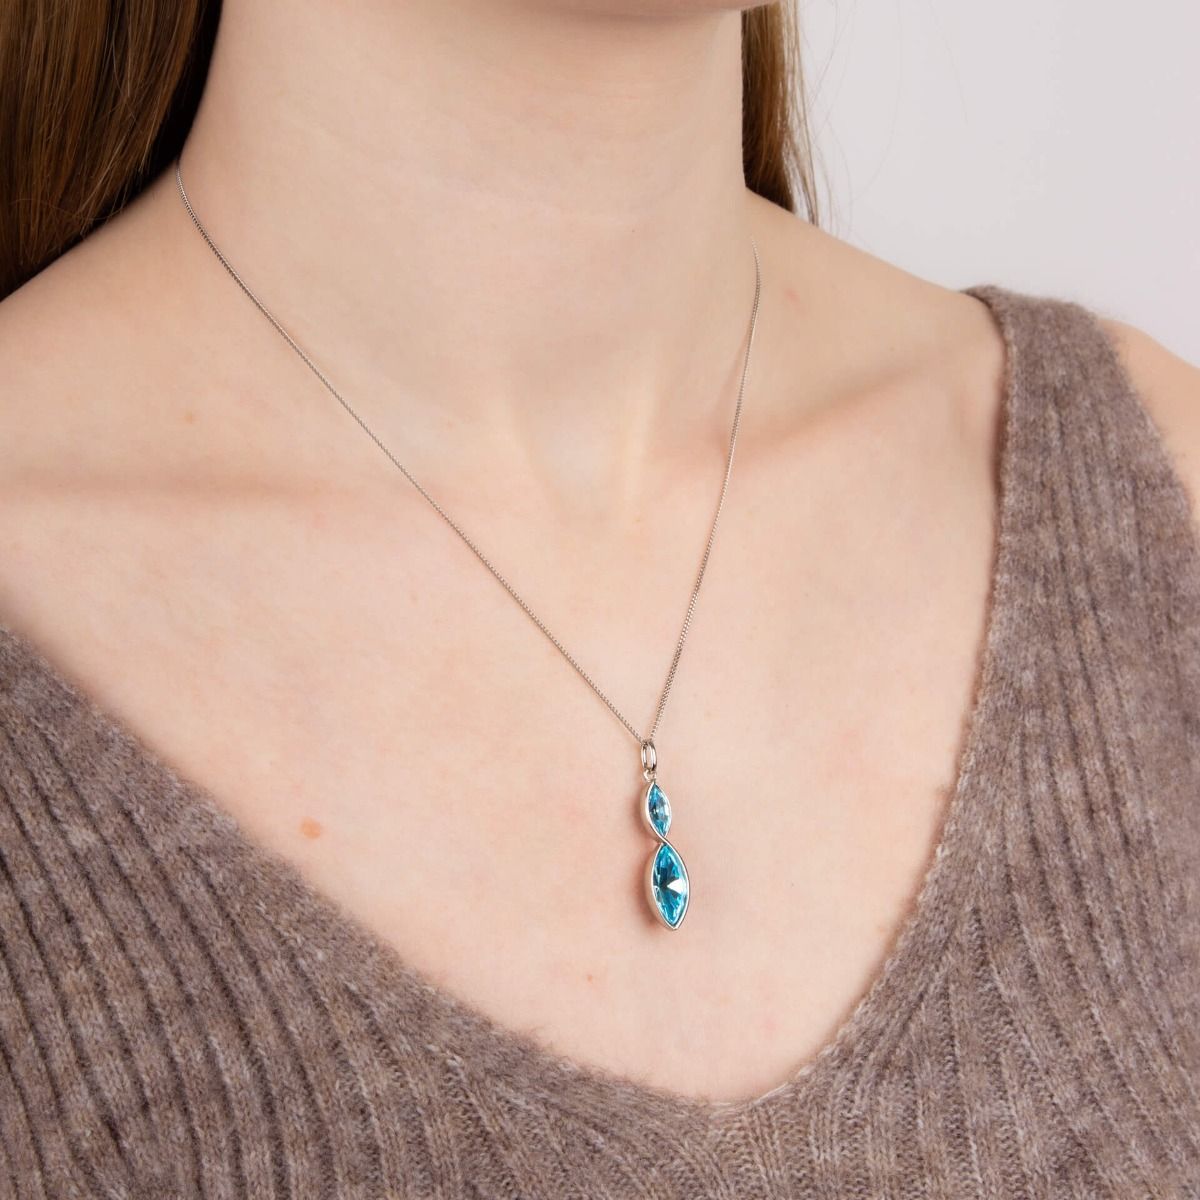 Fiorelli blue marquise shaped crystal necklace on neck